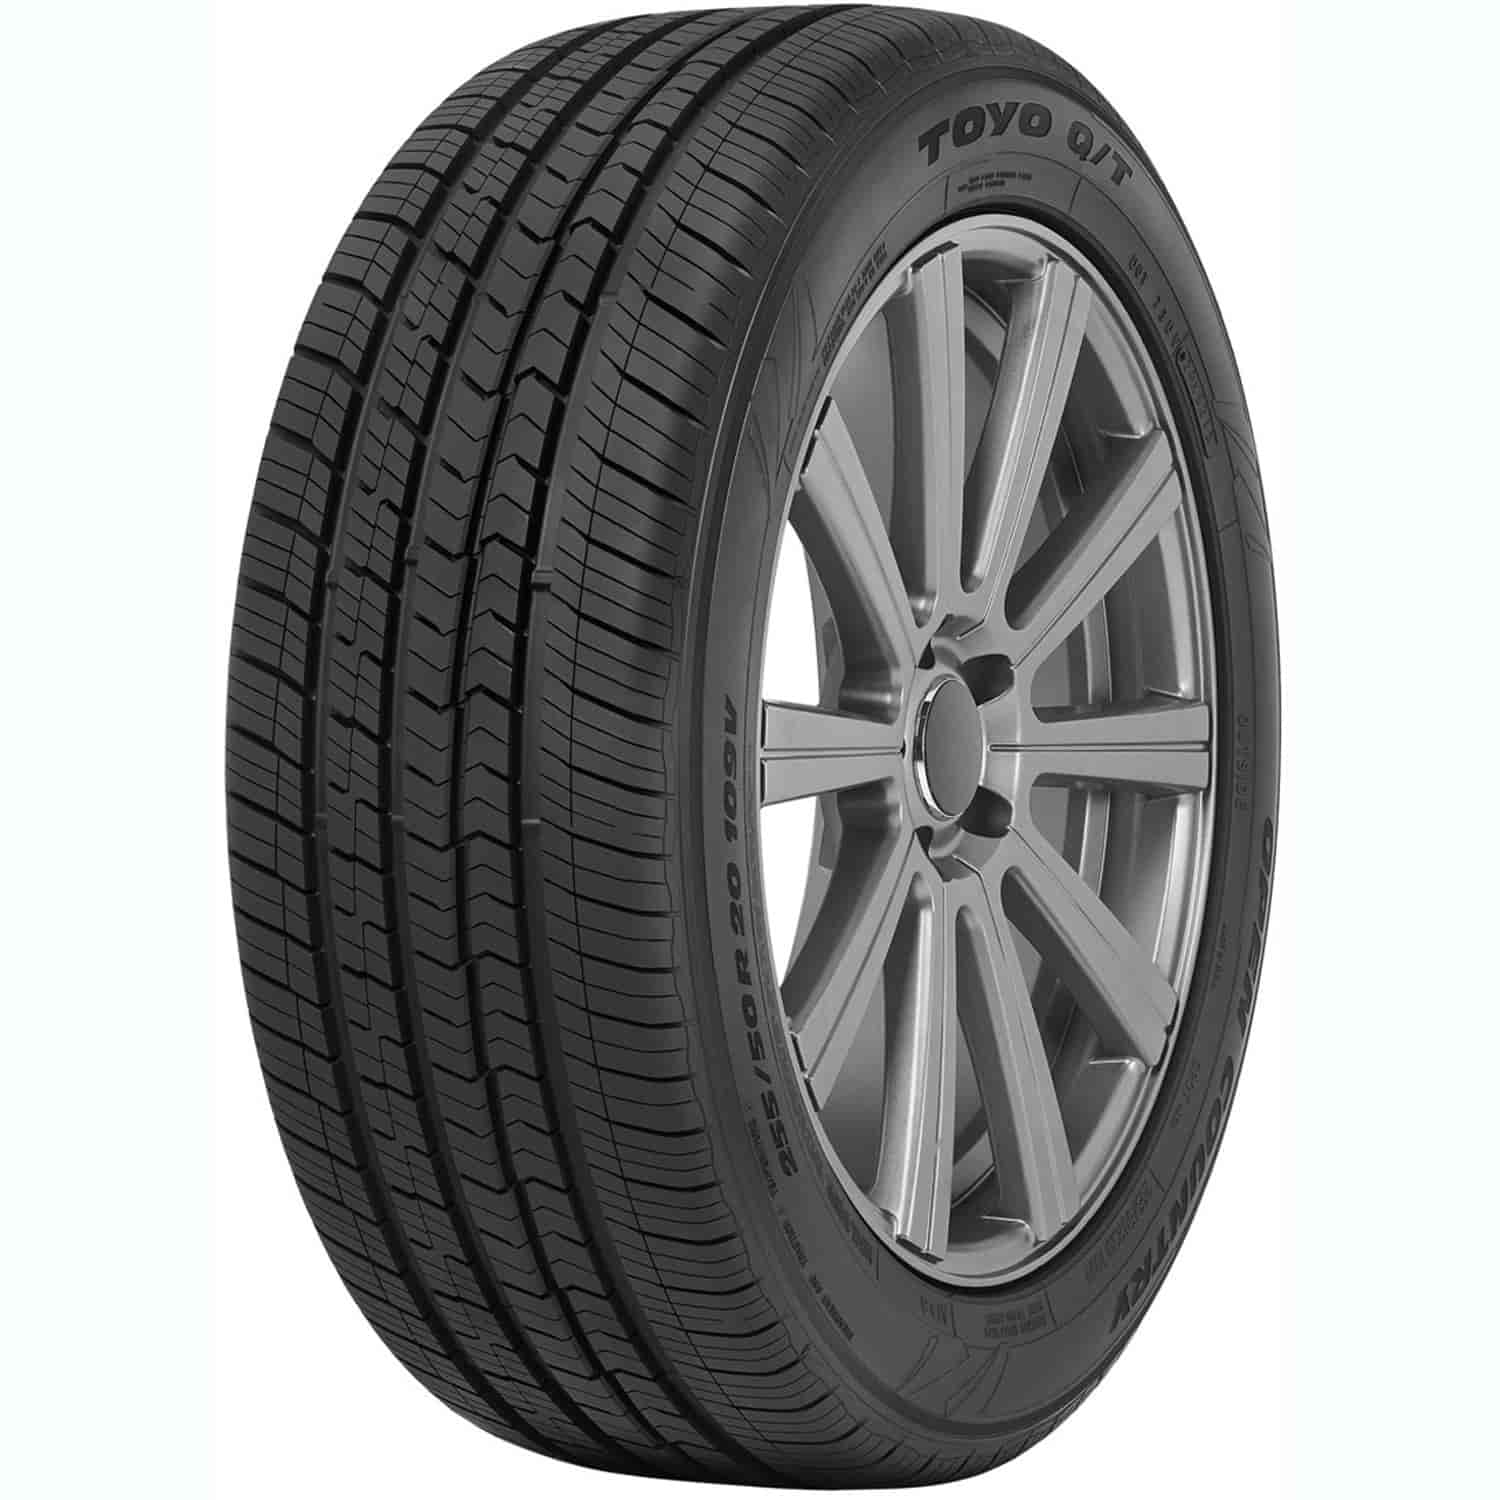 OPEN COUNTRY Q/T 255/60R17 106V